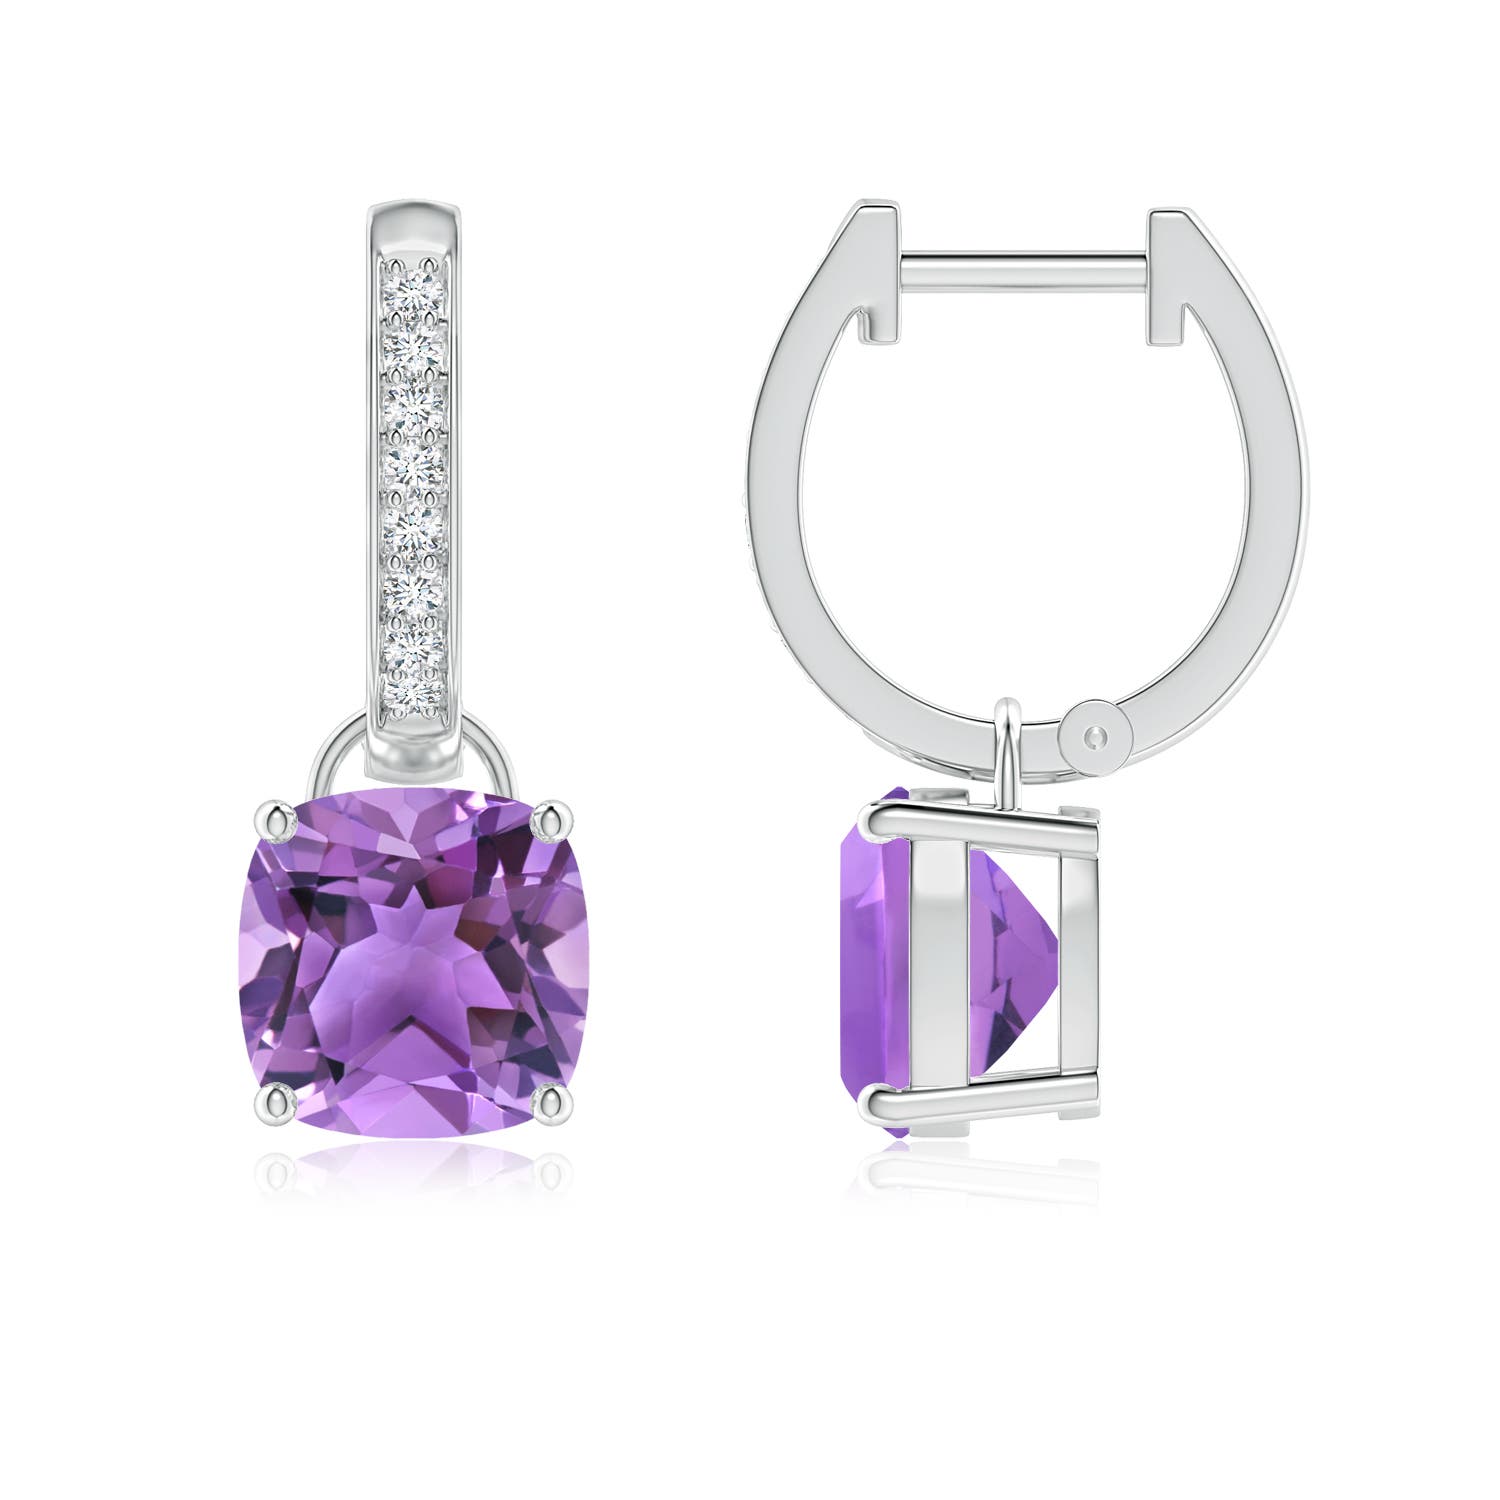 AA - Amethyst / 2.83 CT / 14 KT White Gold